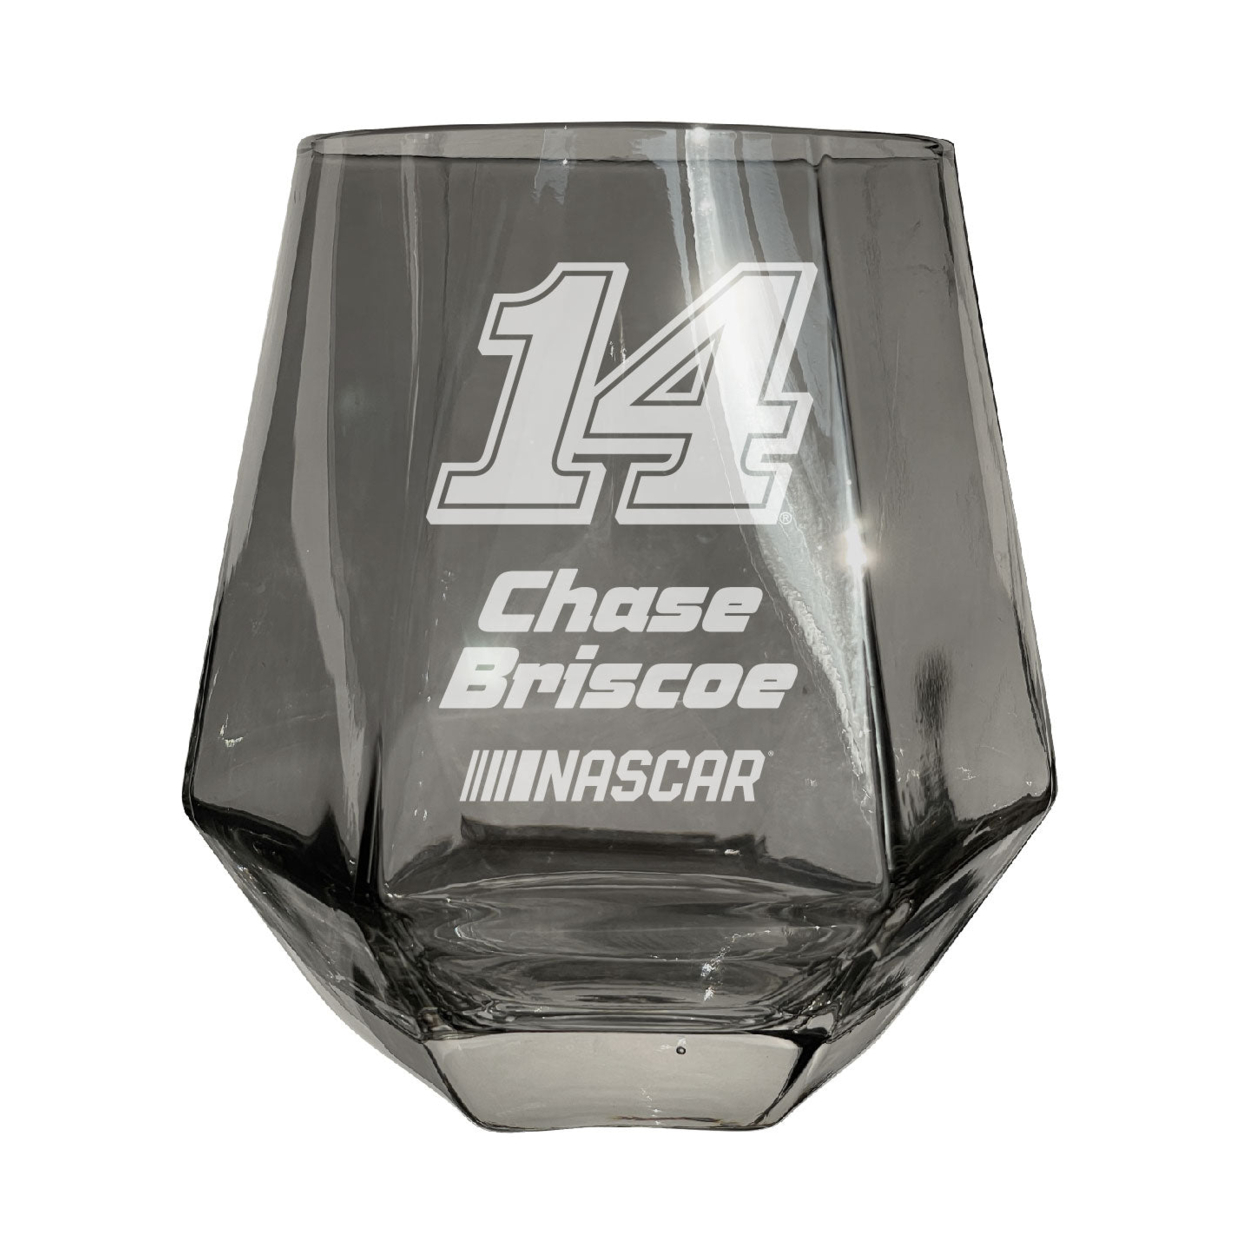 #14 Chase Briscoe Officially Licensed 10 Oz Engraved Diamond Wine Glass - Iridescent, Single